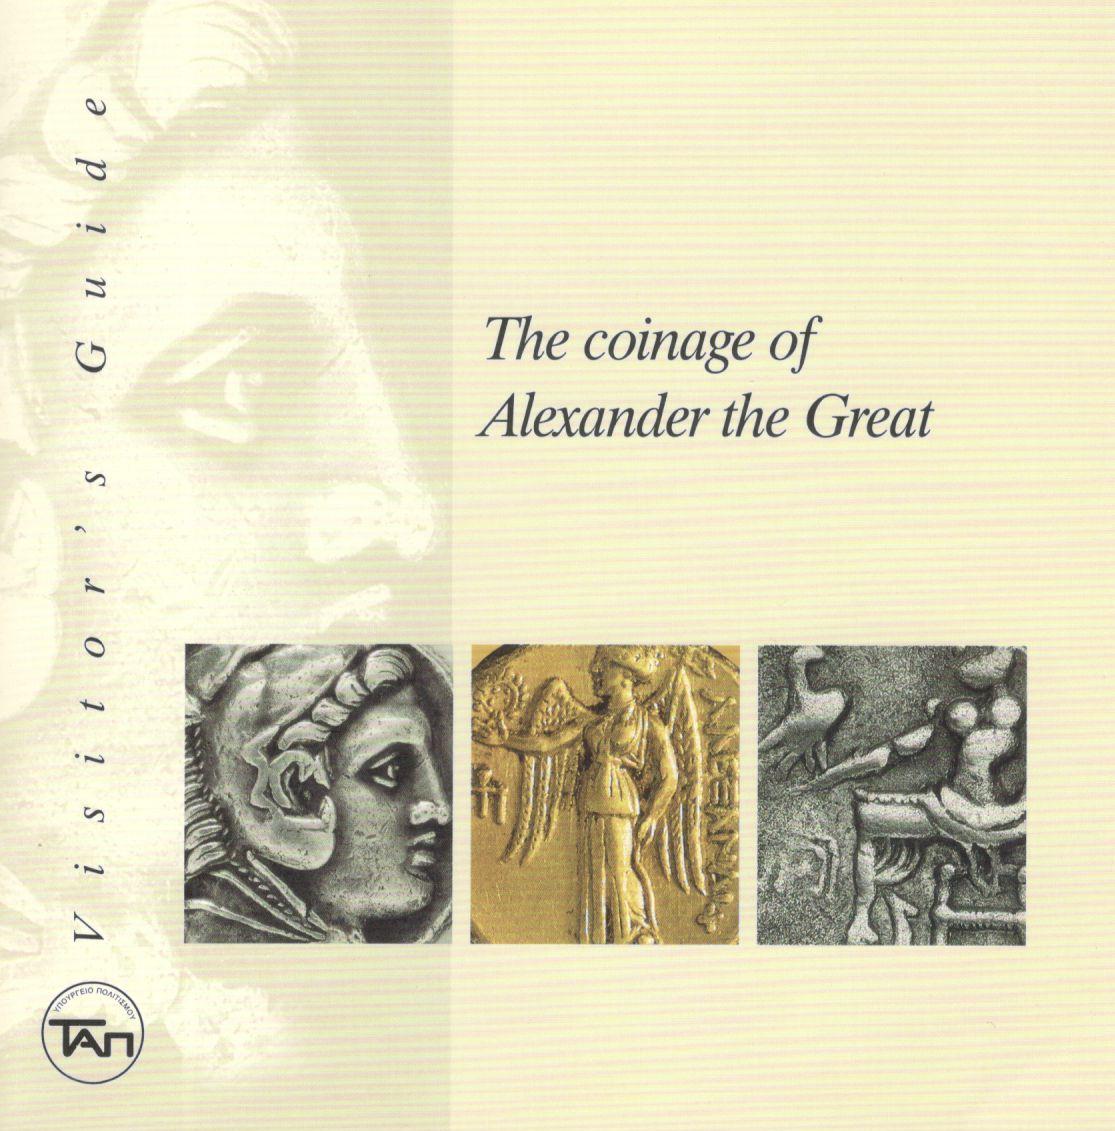 THE COINAGE OF ALEXANDER THE GREAT